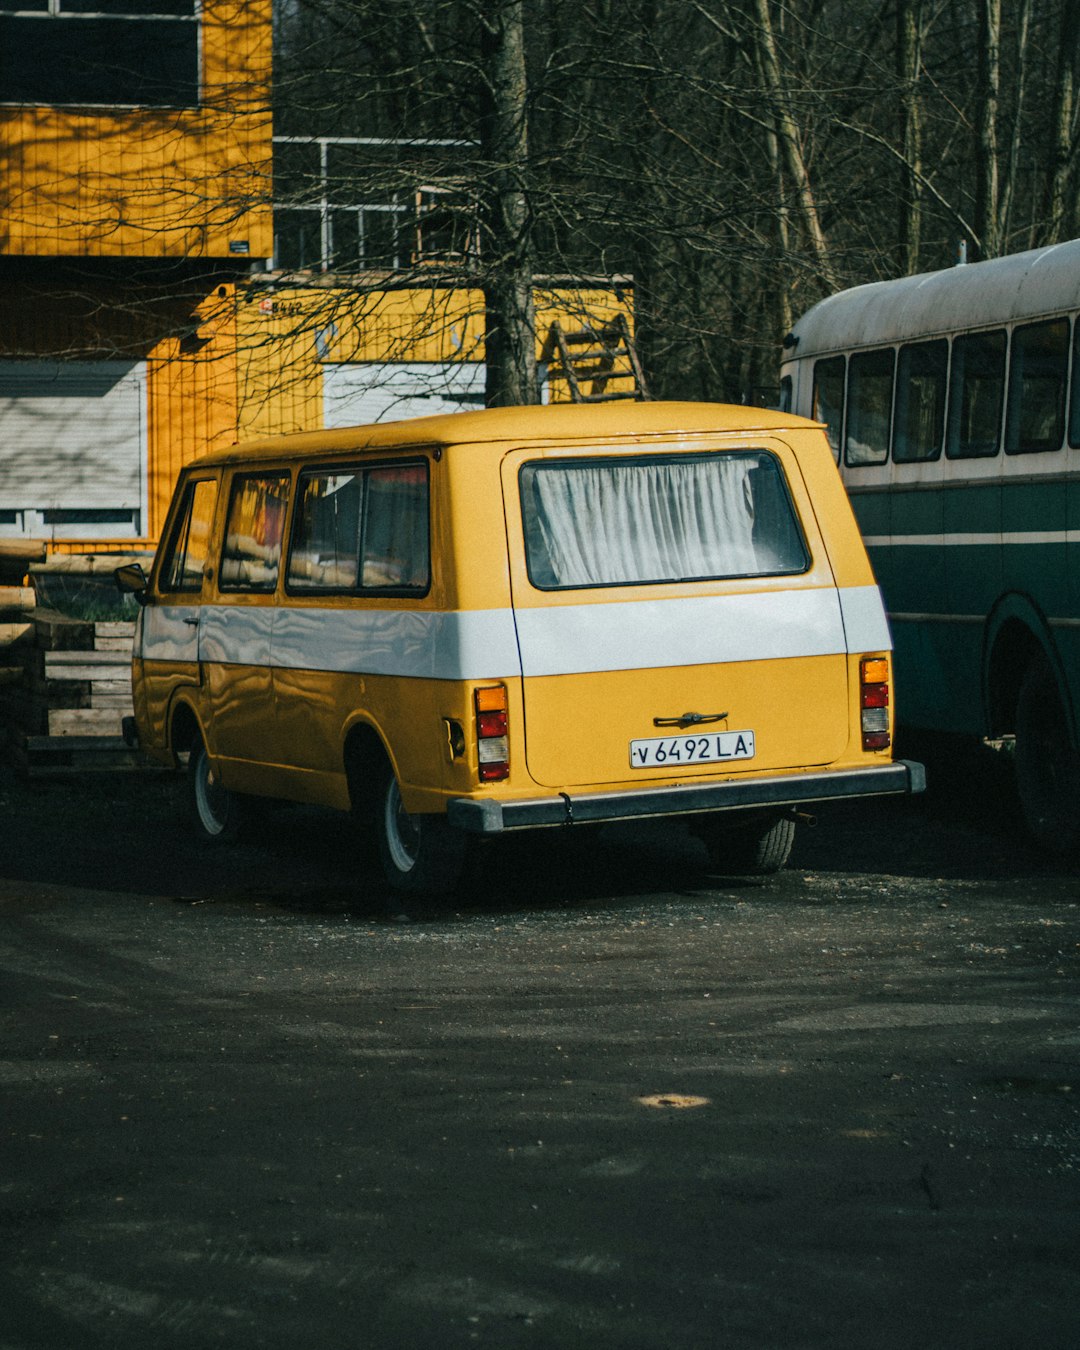 blue and white van parked beside yellow and white concrete building during daytime